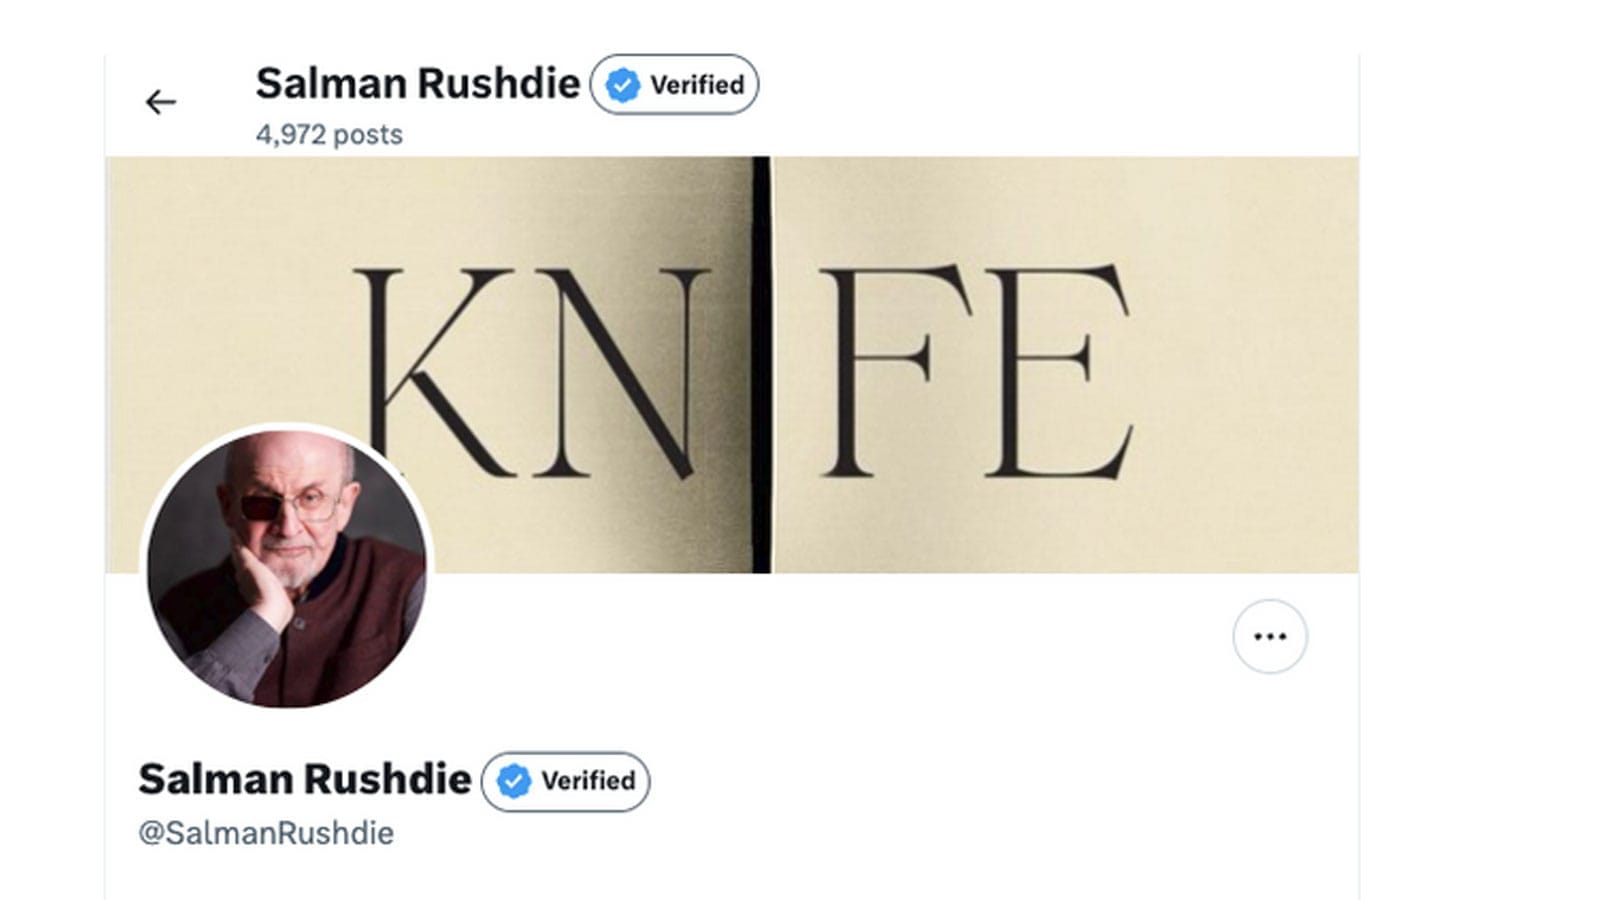 Twitter profile of the author Salman Rushdie, with avatar and blue check; cover image is the cover of his memoir, 'Knife'